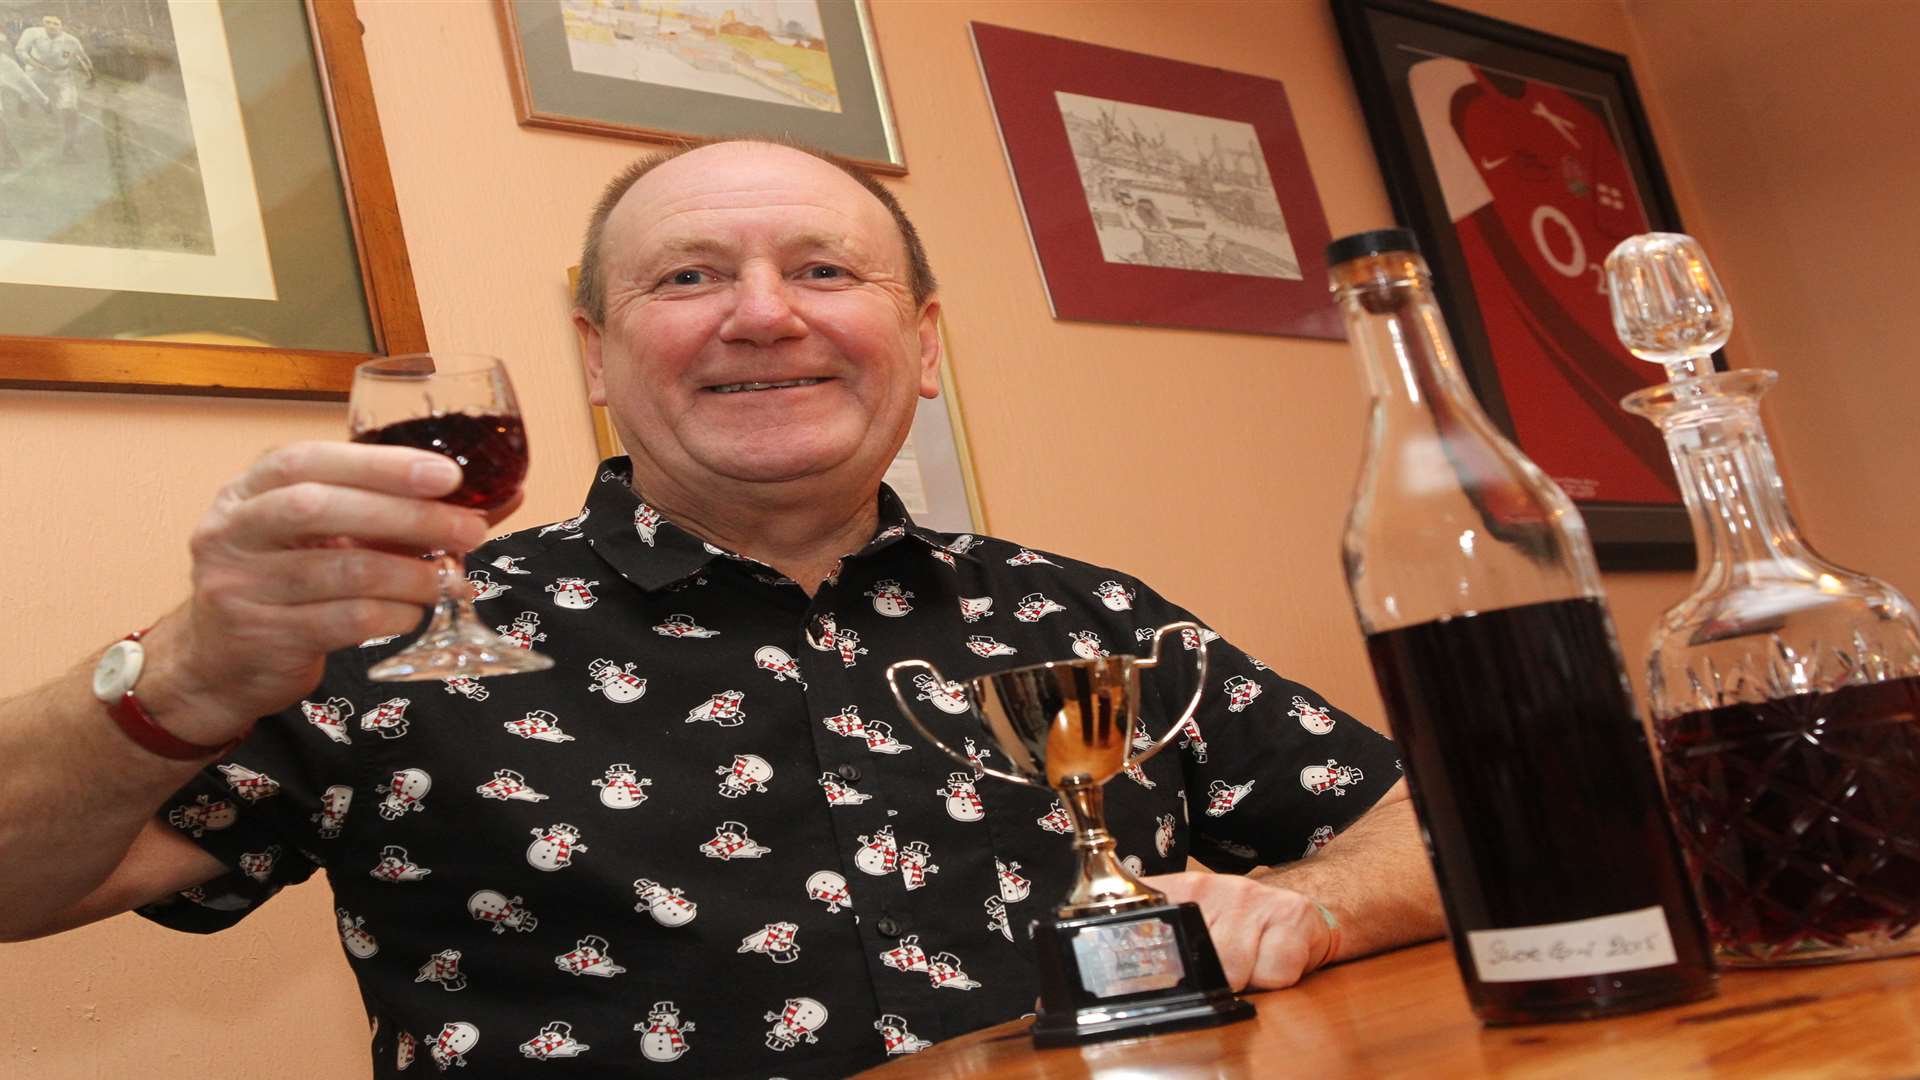 Kevin Ladley celebrates with a glass after wining the World's Sloe Gin award.